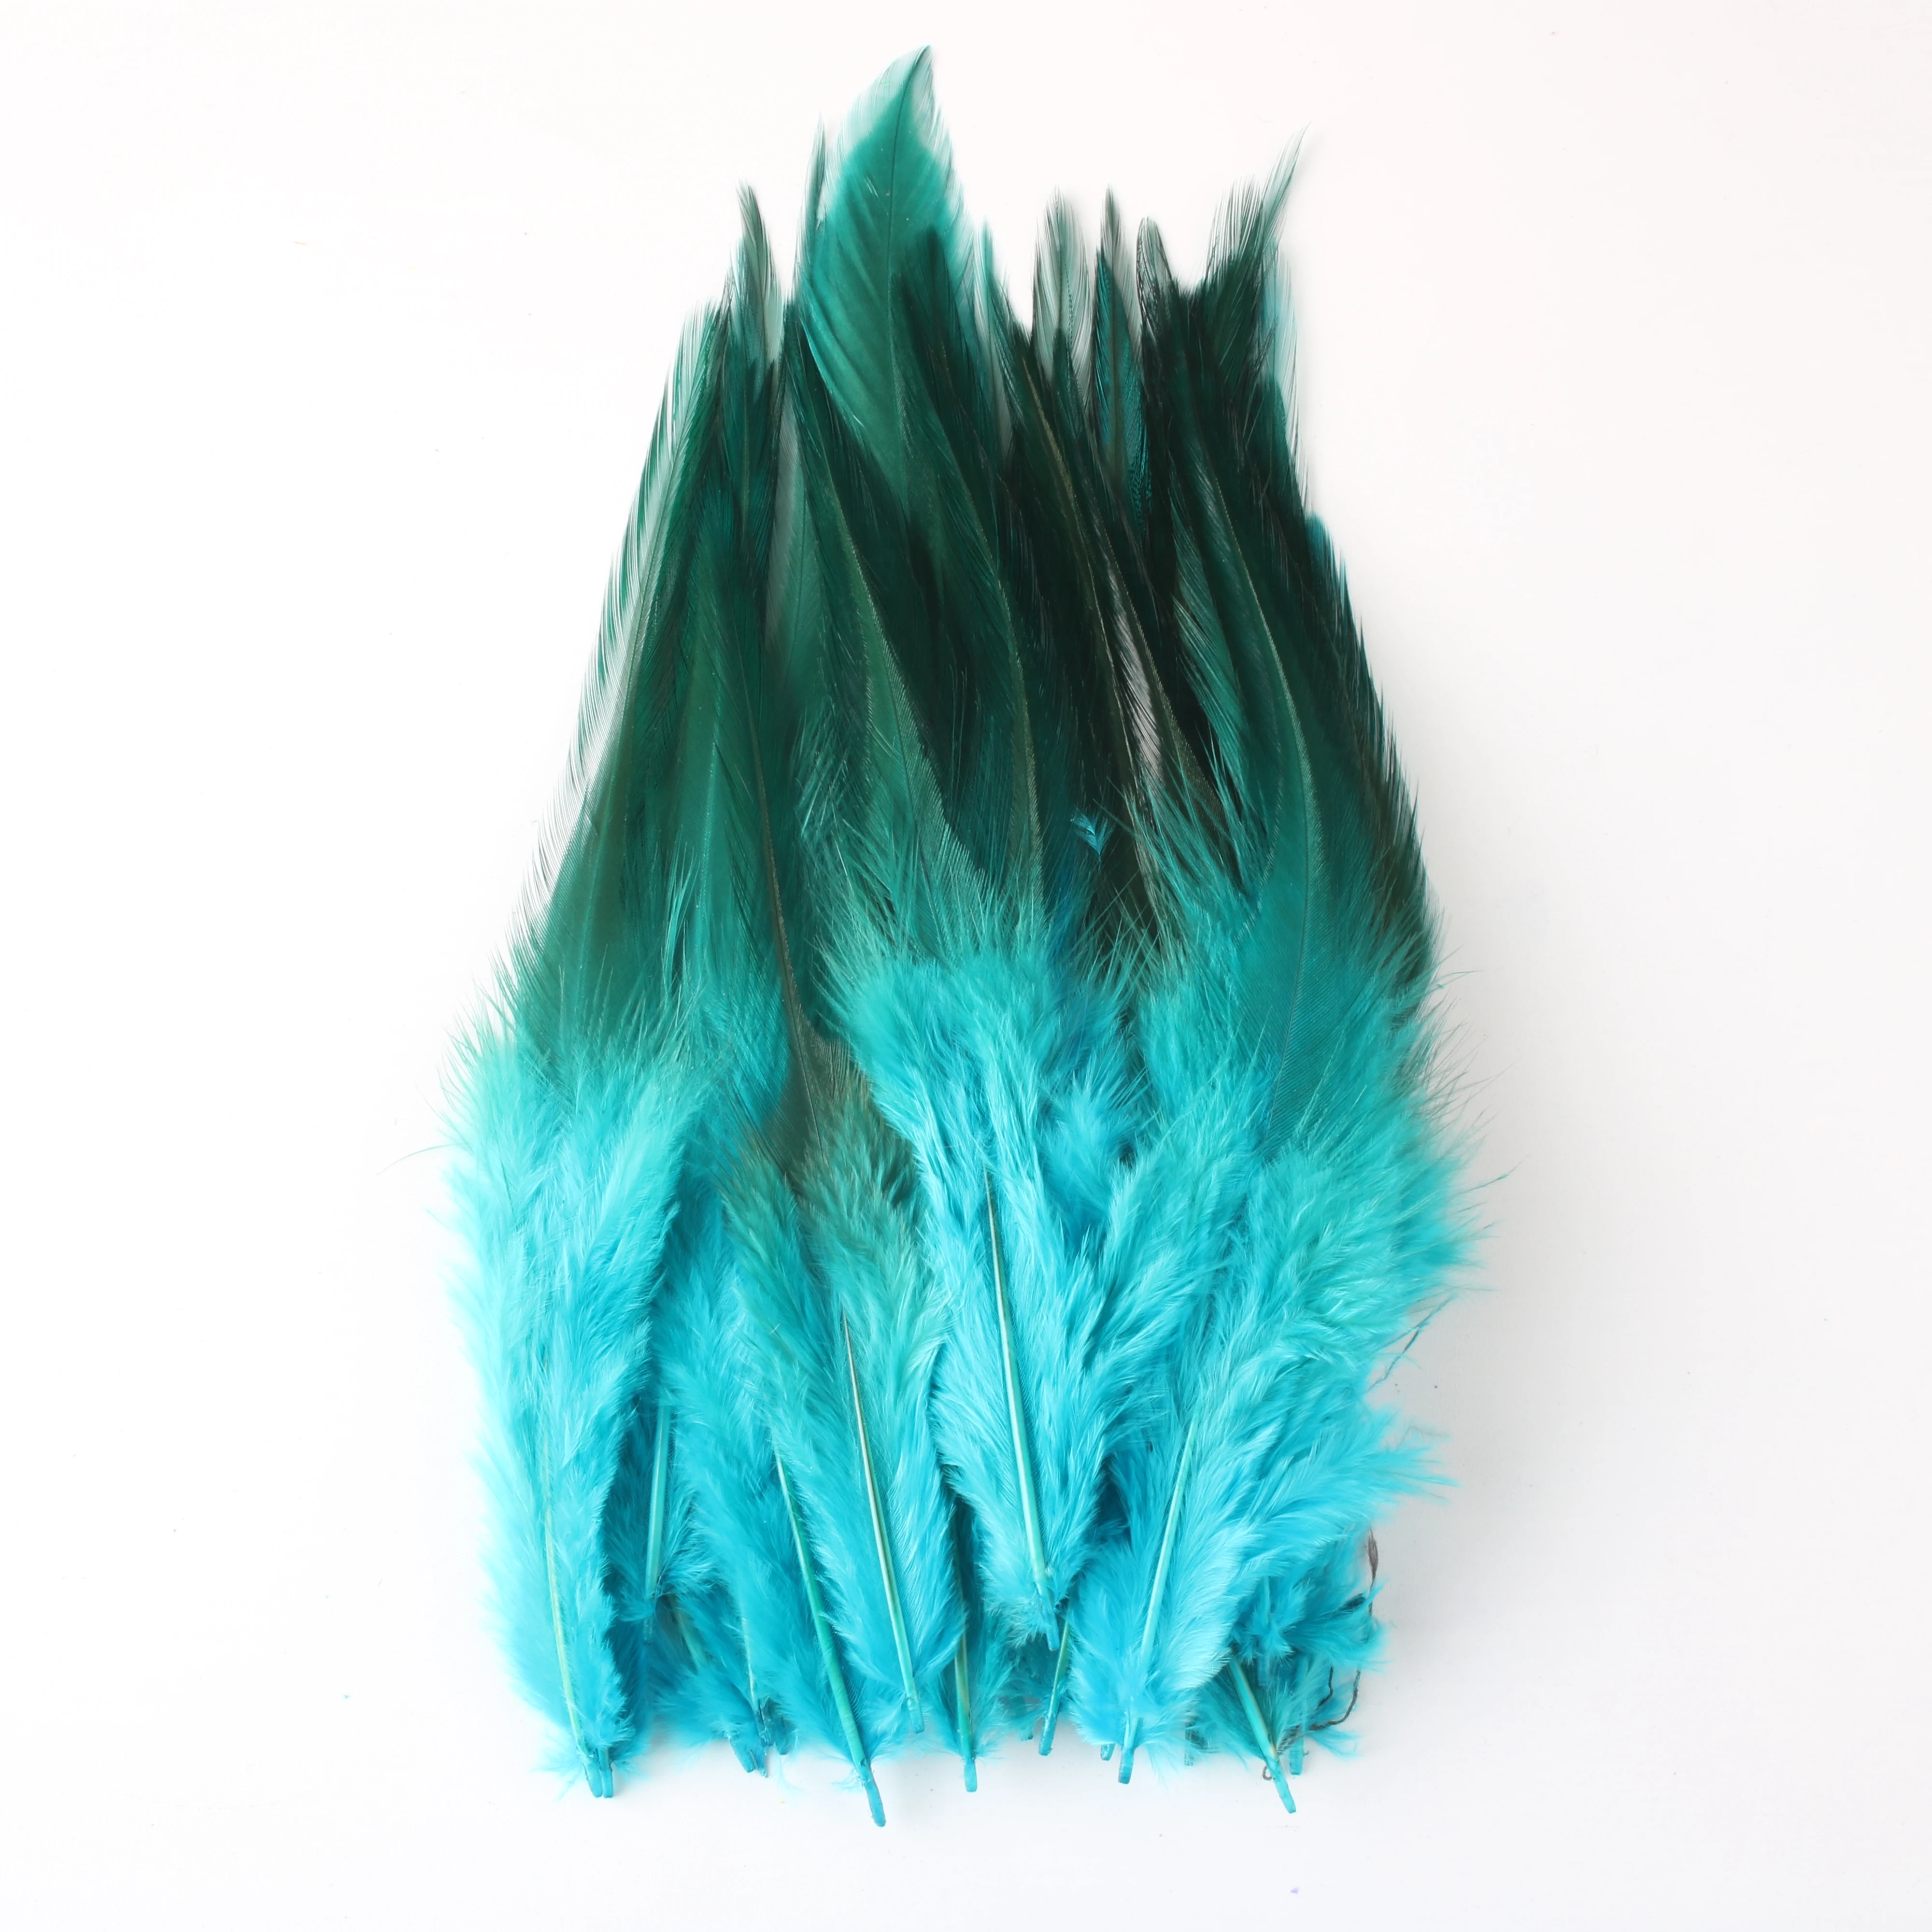 Wholesale 50 Pcs/Lot High Quality Chicken Feathers For Crafts 4-6 Inch 10-15cm Rooster Feathers Plume Jewelry Decoration Plumes images - 6